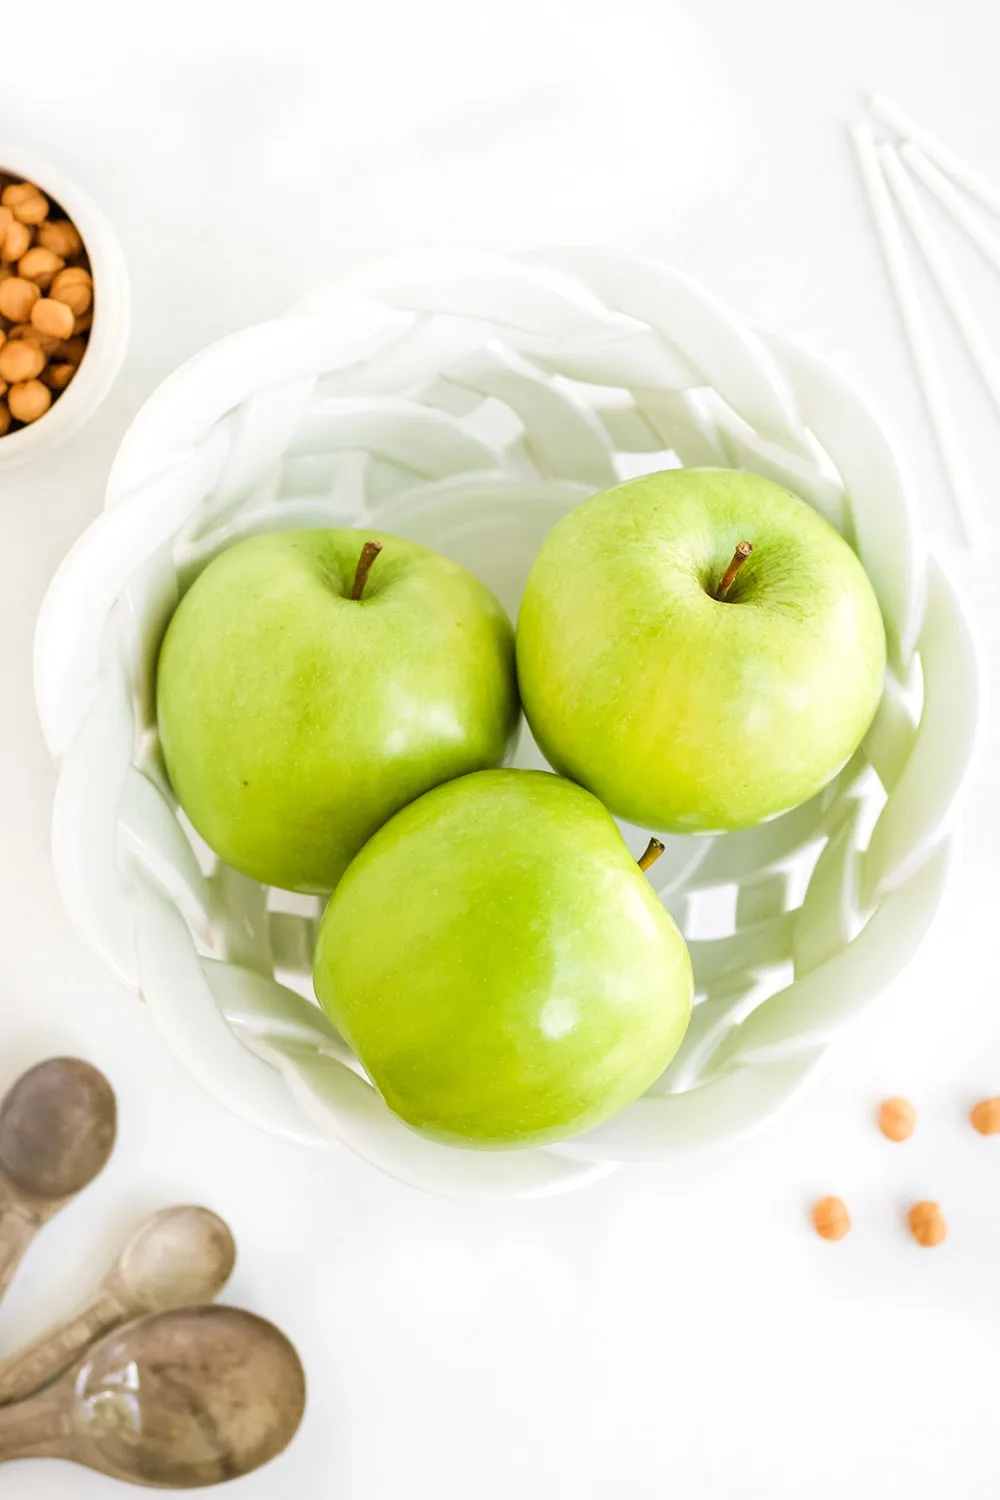 Granny smith apples in a bowl.